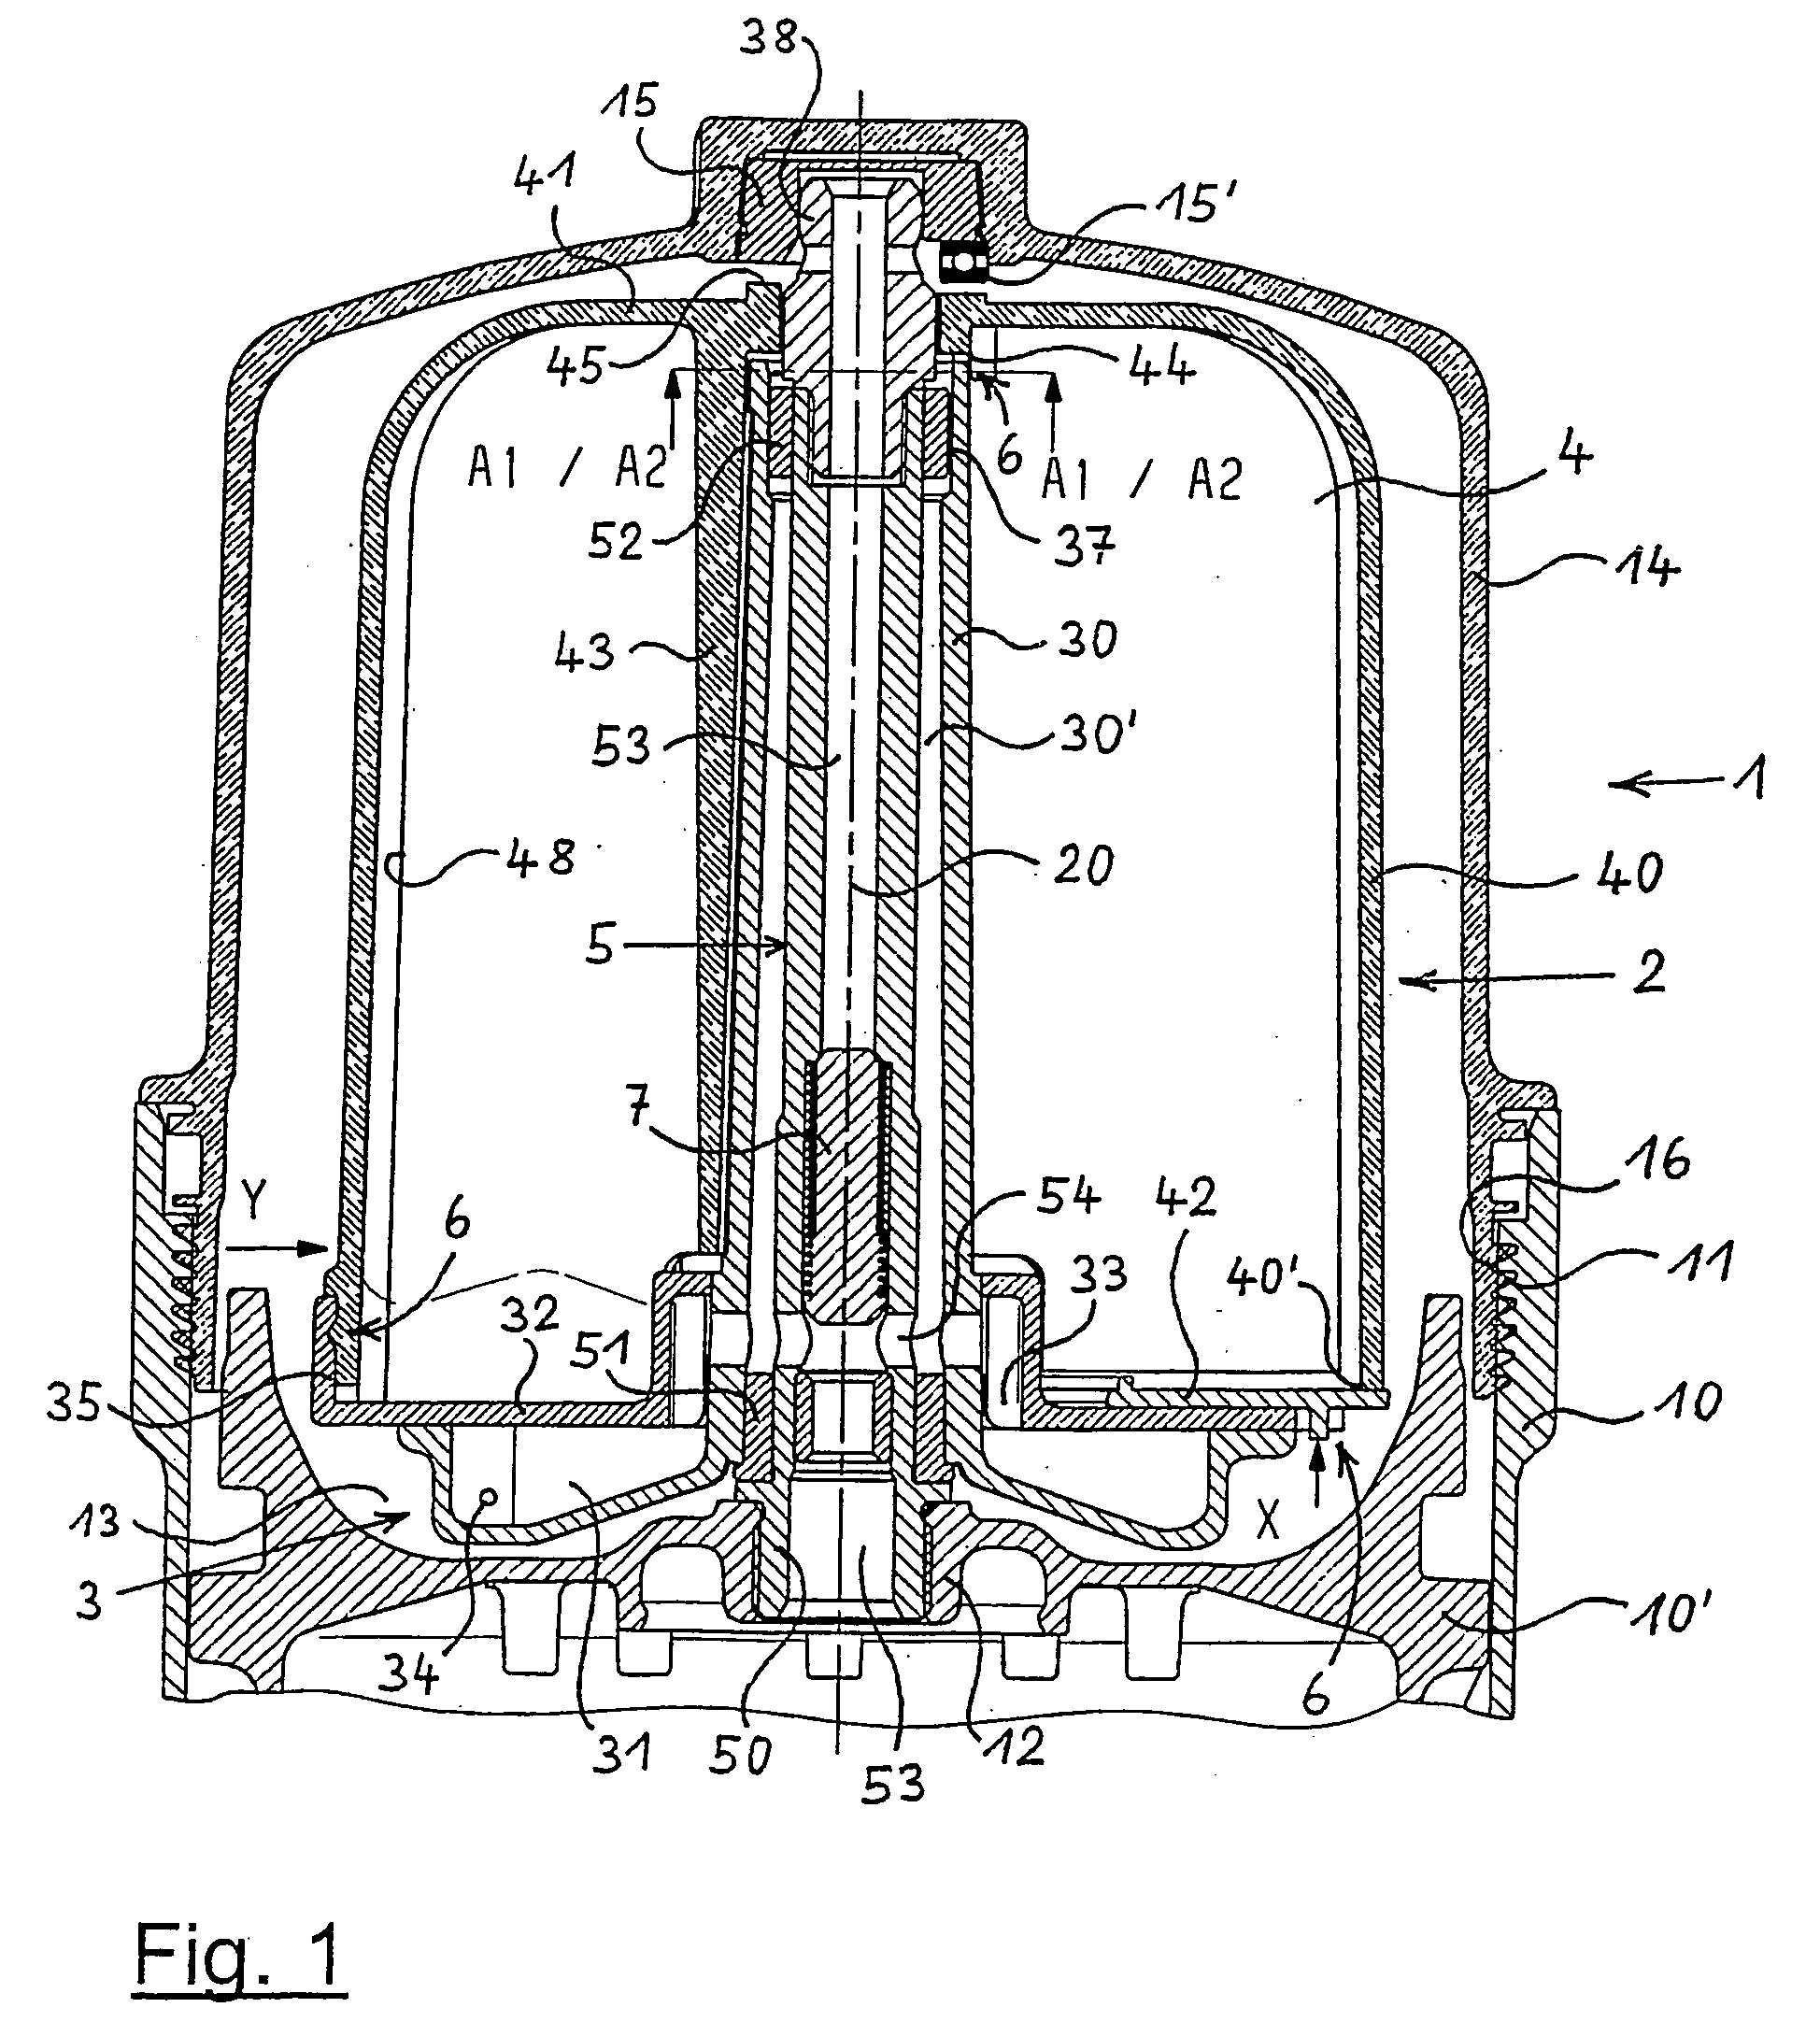 Impulse Centrifuge for the Purification of the Lubricating Oil from an Internal Combustion Engine